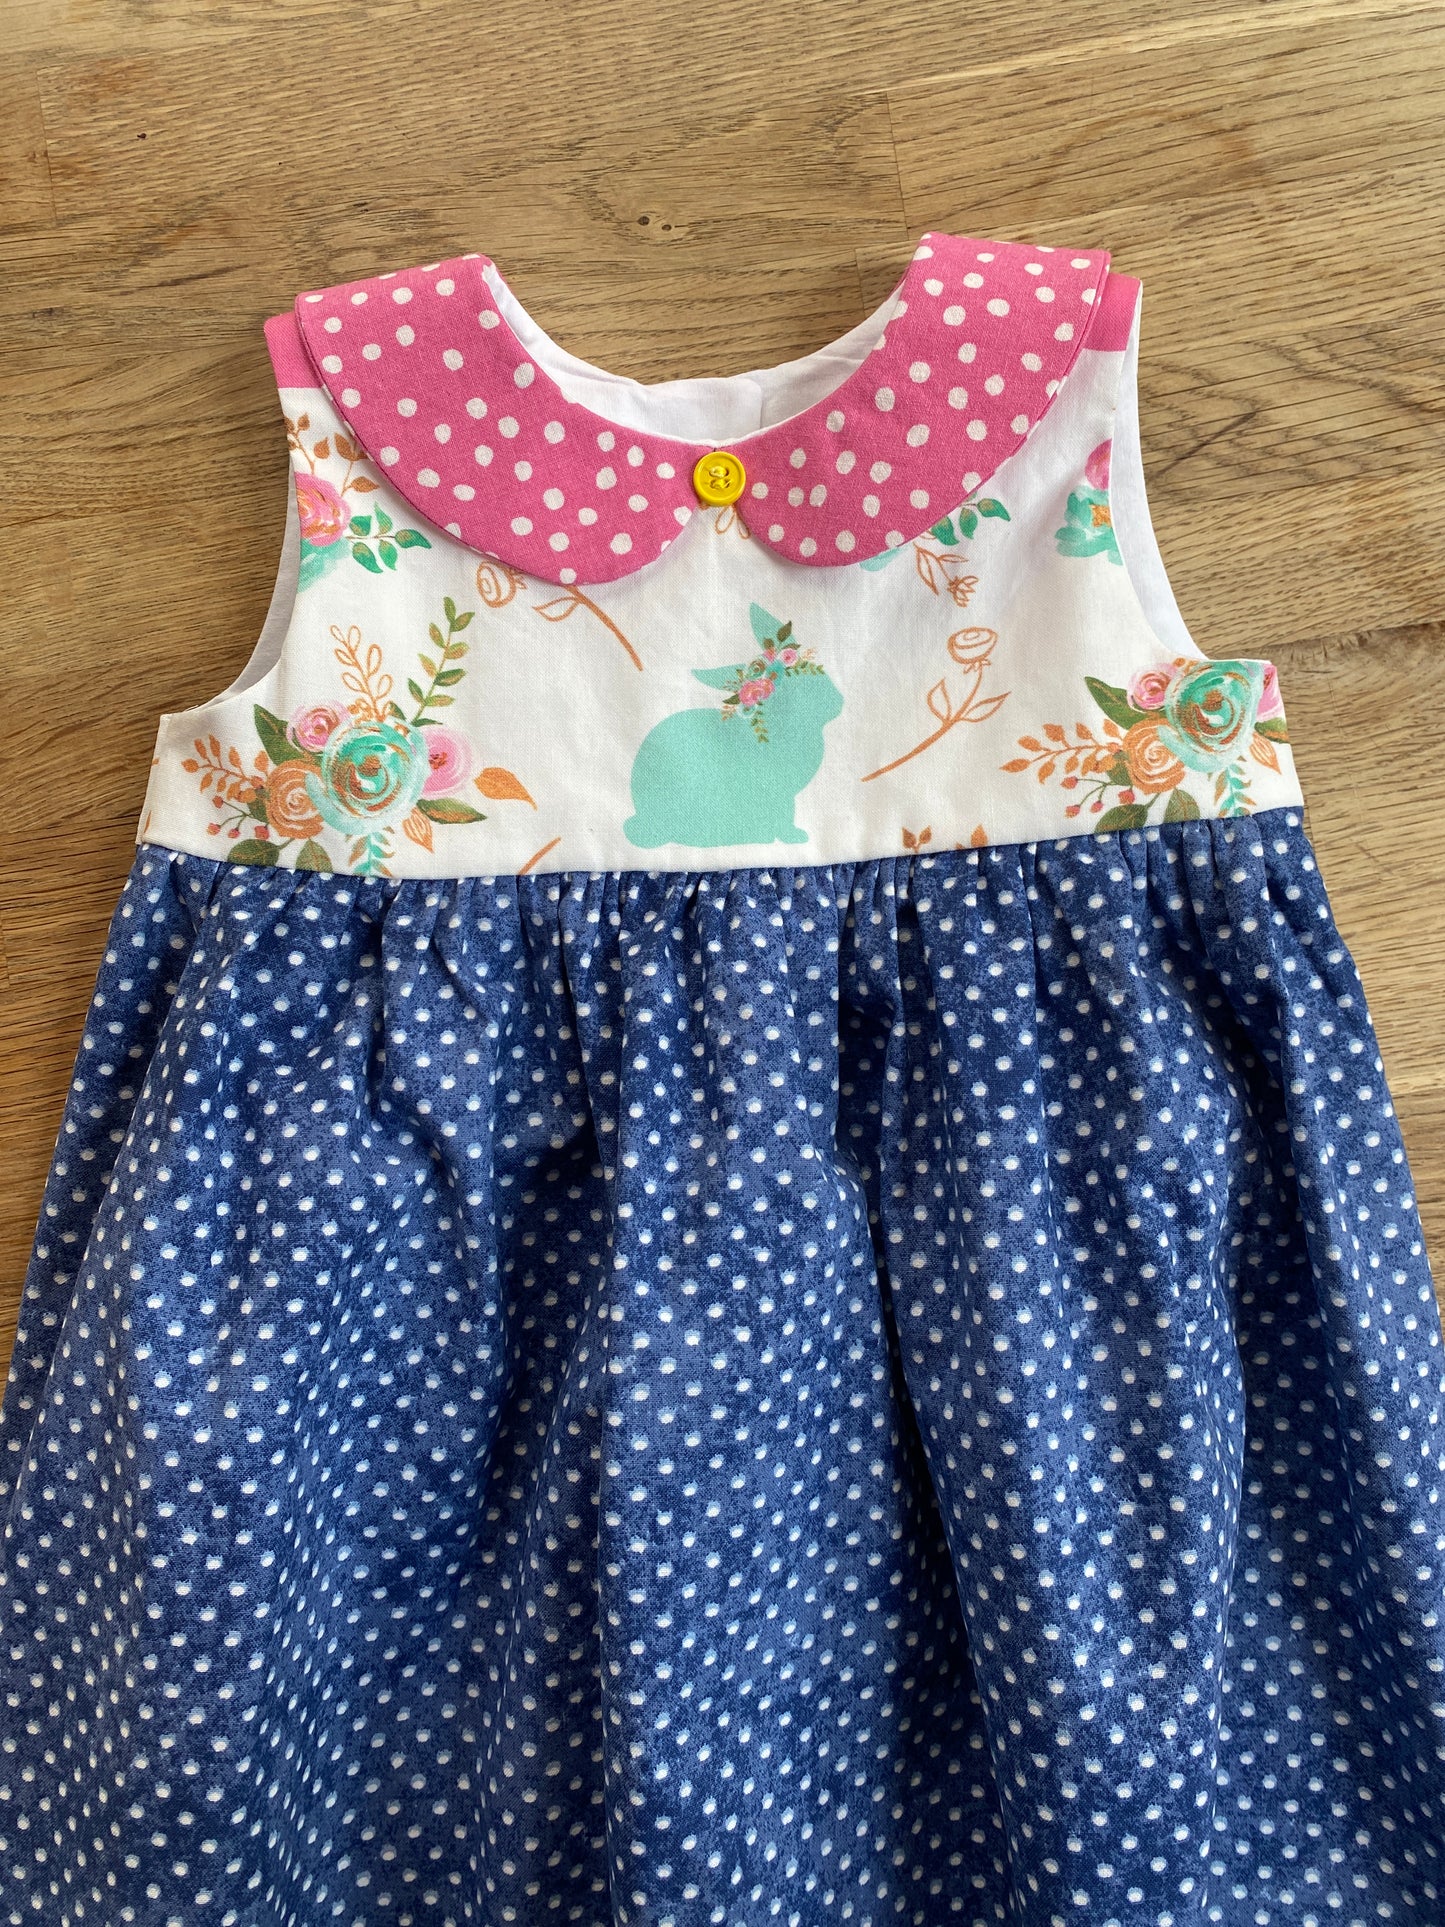 Pink and Blue Bunny Dress (NEW) - 2t